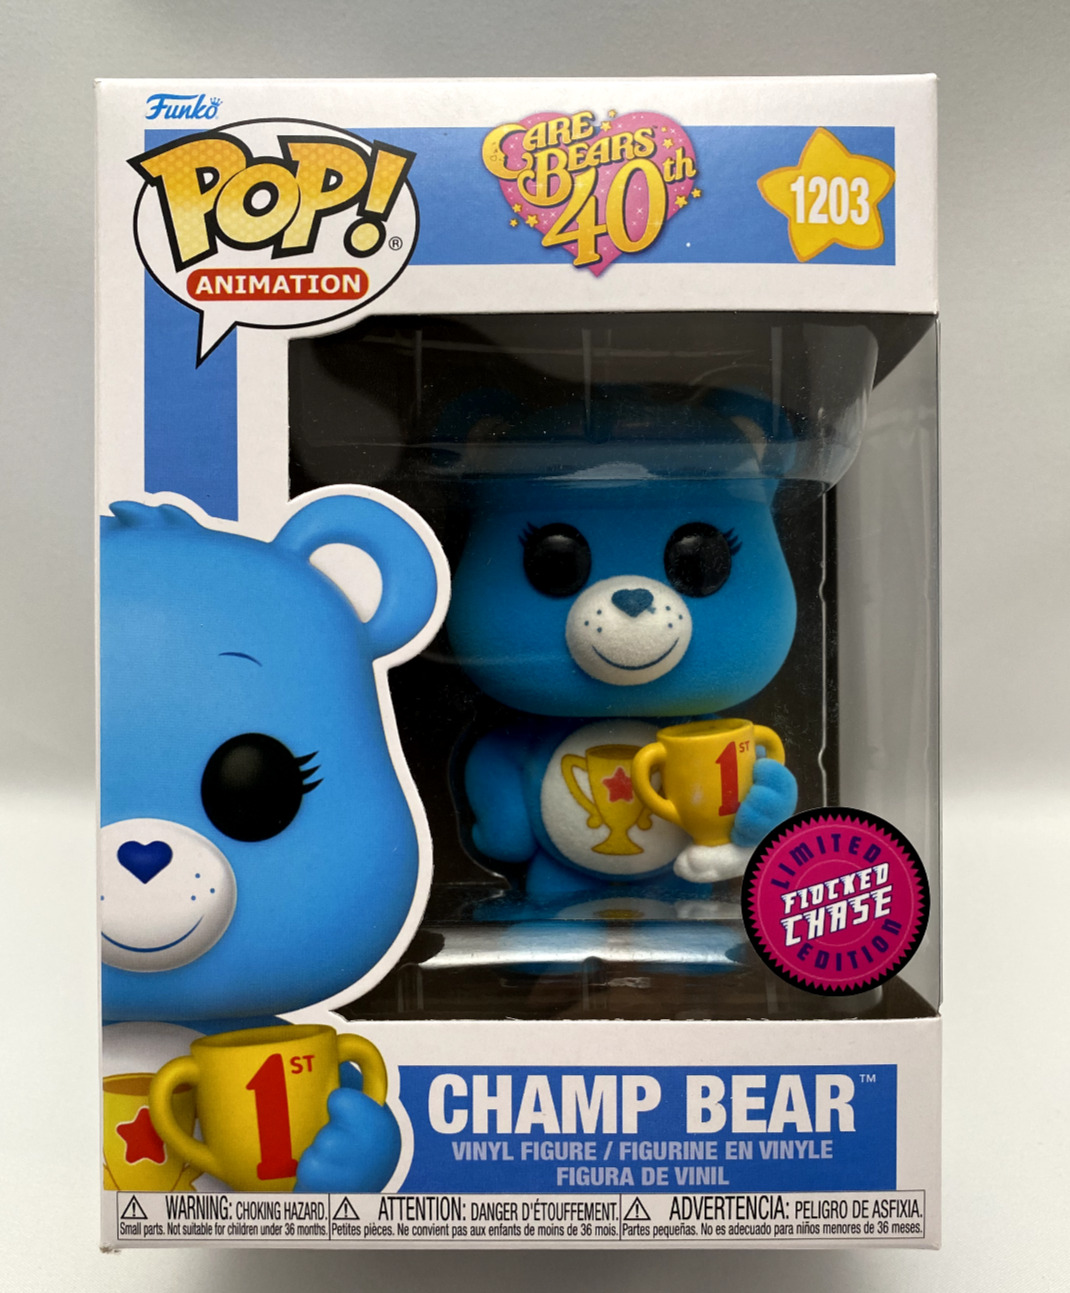 Funko POP Care Bears 40th Champ Bear Limited Edition Flocked Chase #1203